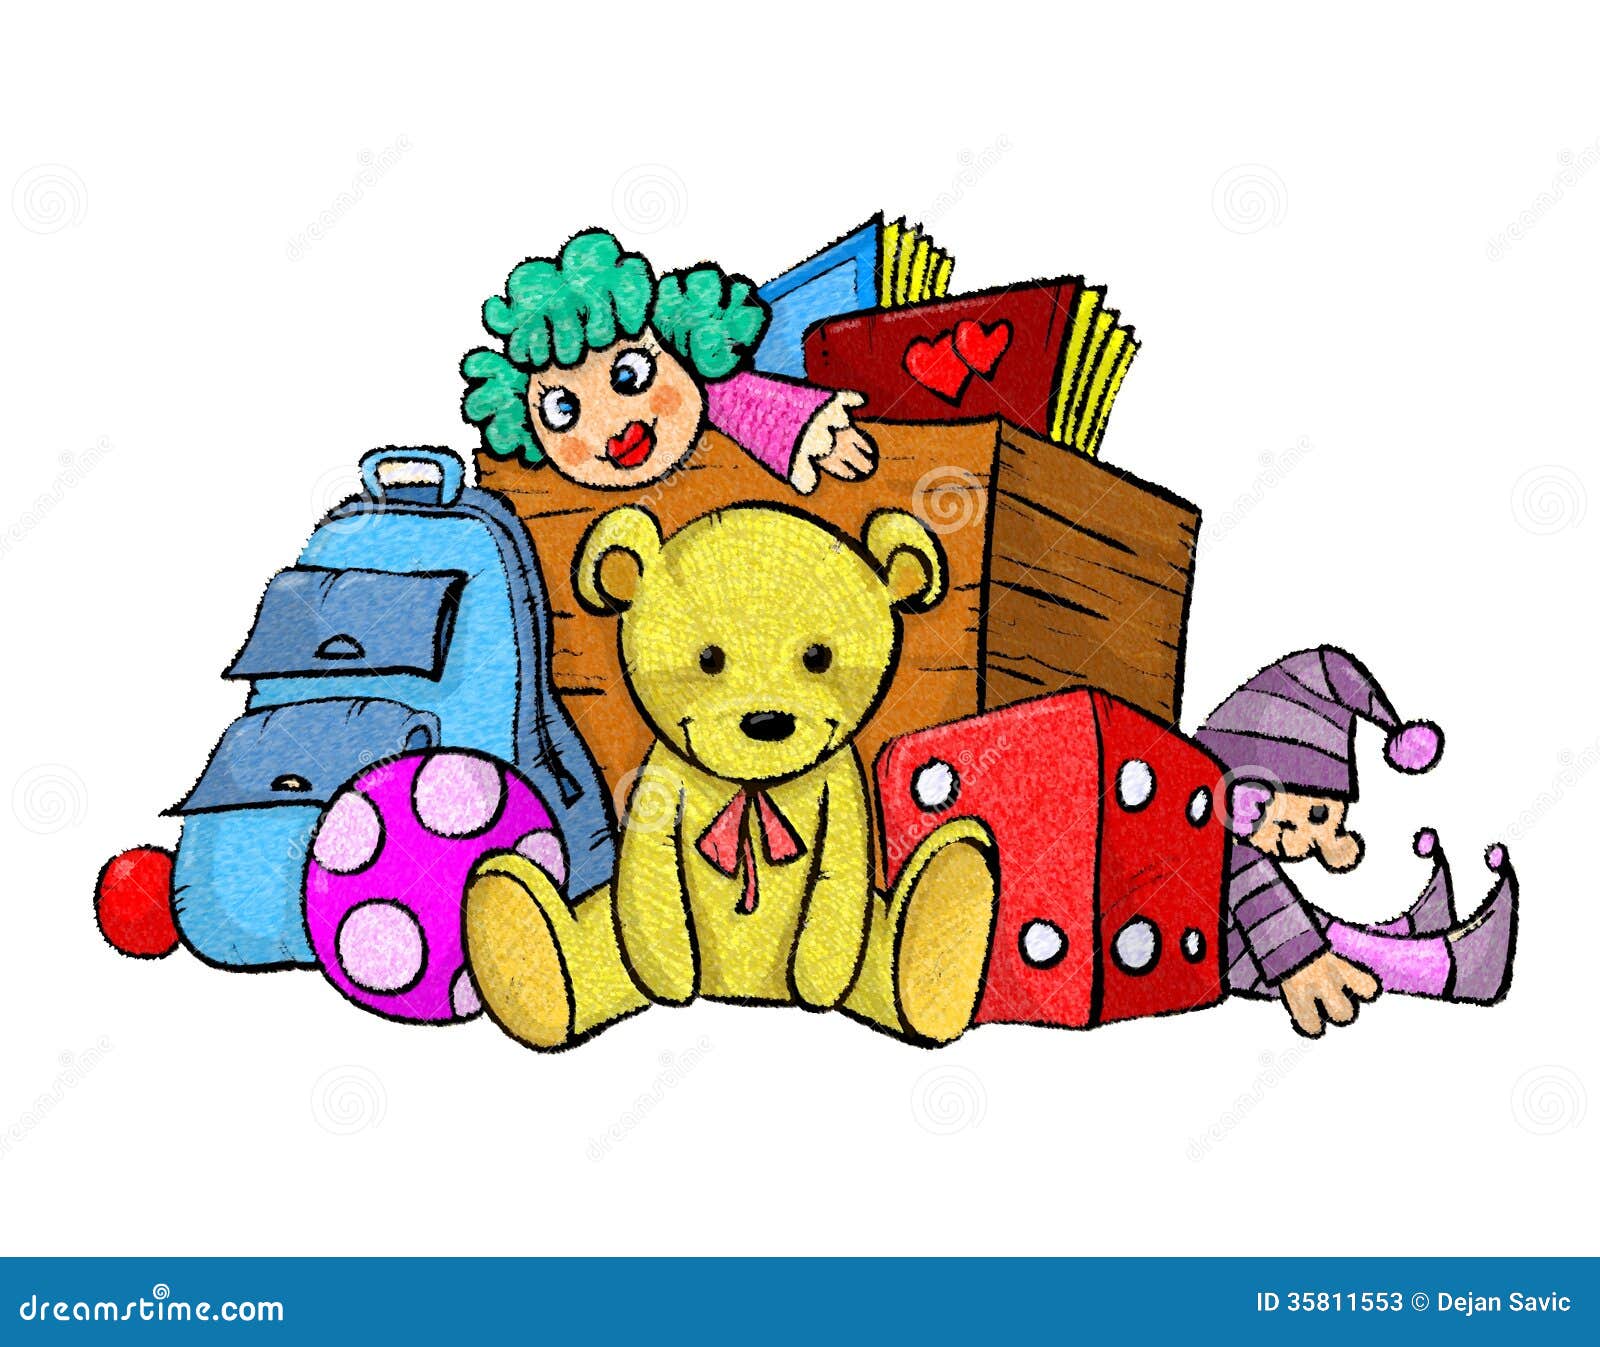 clip art toys and games - photo #5